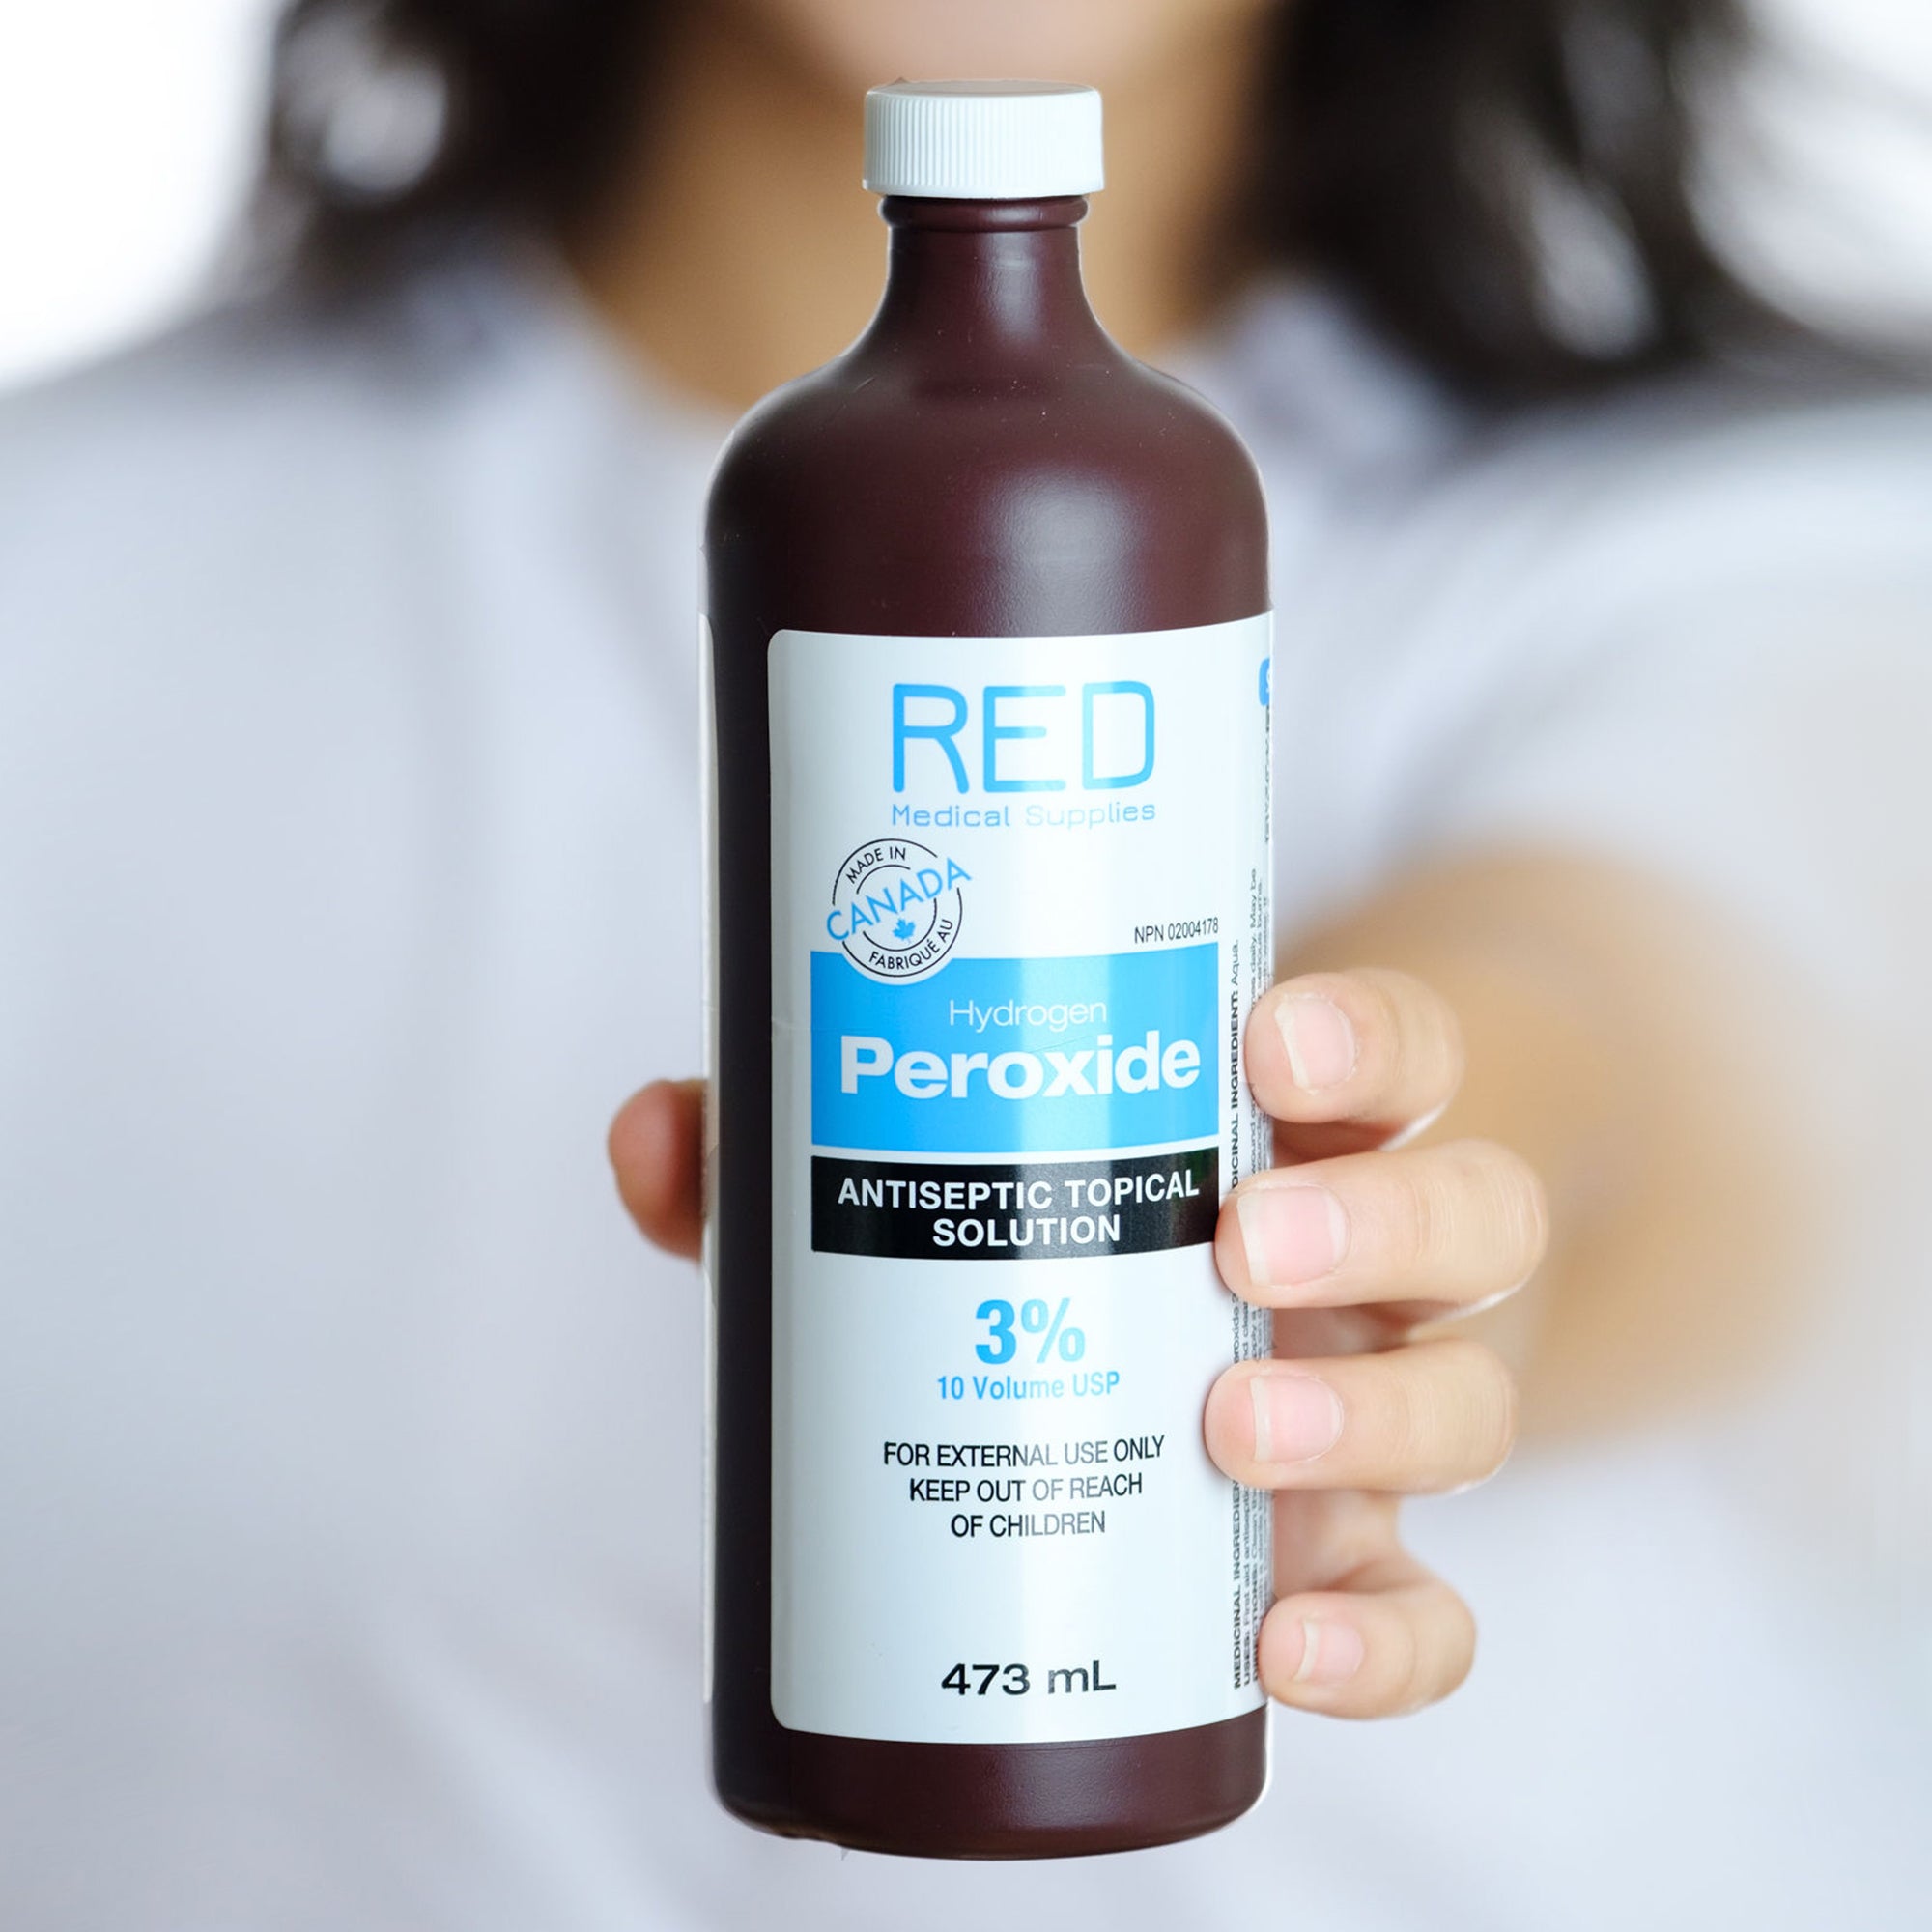 Hydrogen Peroxide 3% USP - 450mL Bottle by RED Medical - RED Medical Supplies | Advanced Care Supplies 